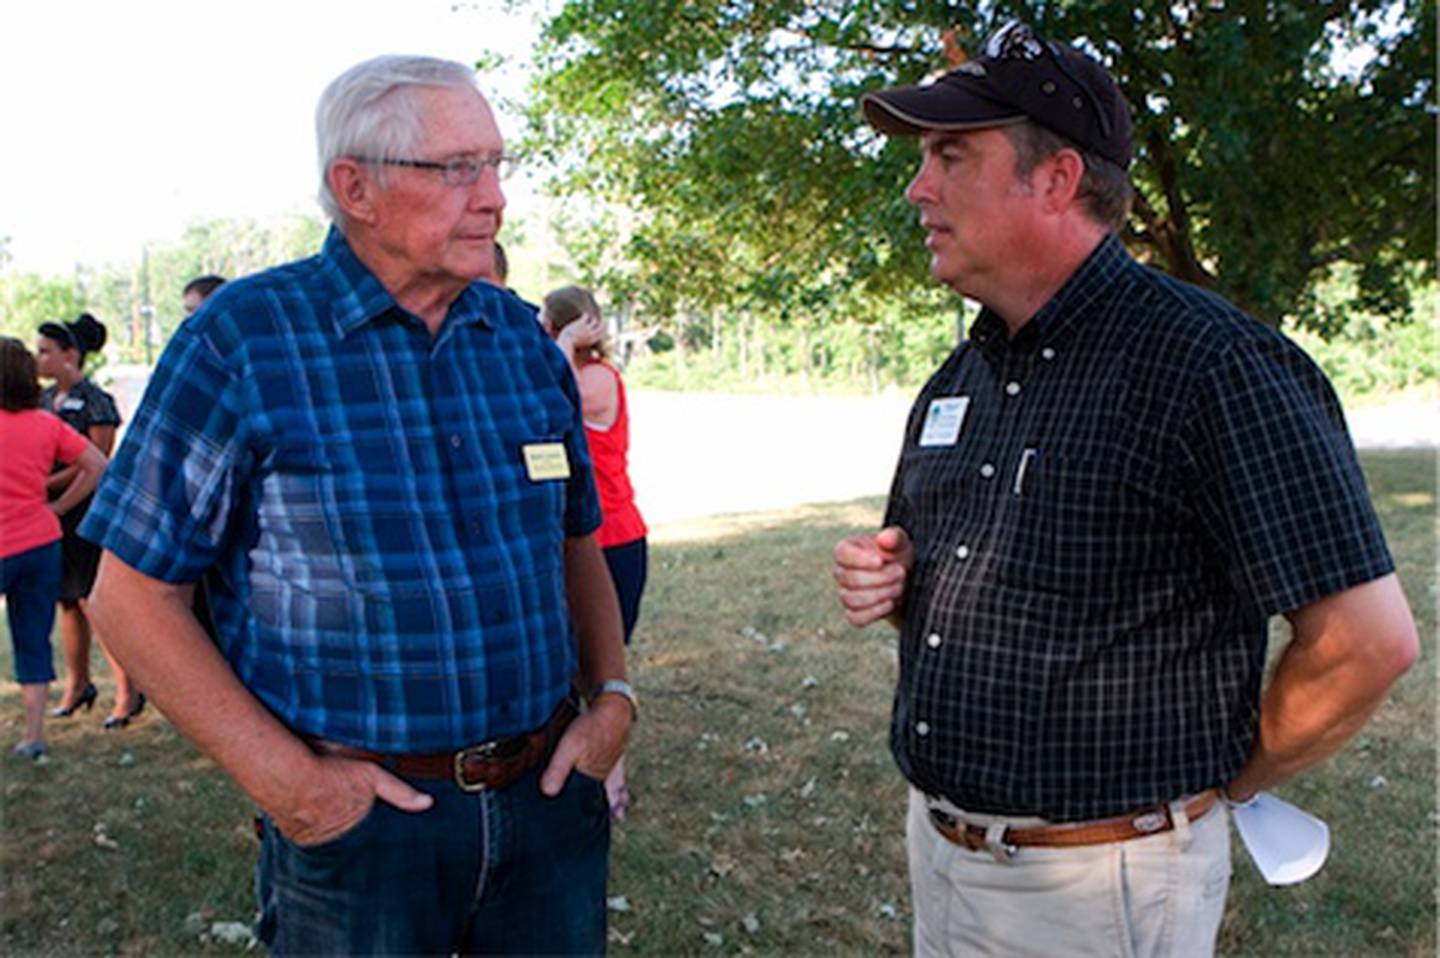 Village of Huntley Trustee Harry Leopold (left) speaks with Thom Palmer, Executive Director of the Huntley Park District, during a celebration held by the Huntley Area Chamber of Commerce to mark the widening of Route 47 Tuesday, July 17, 2012 at Deicke Park in Huntley.